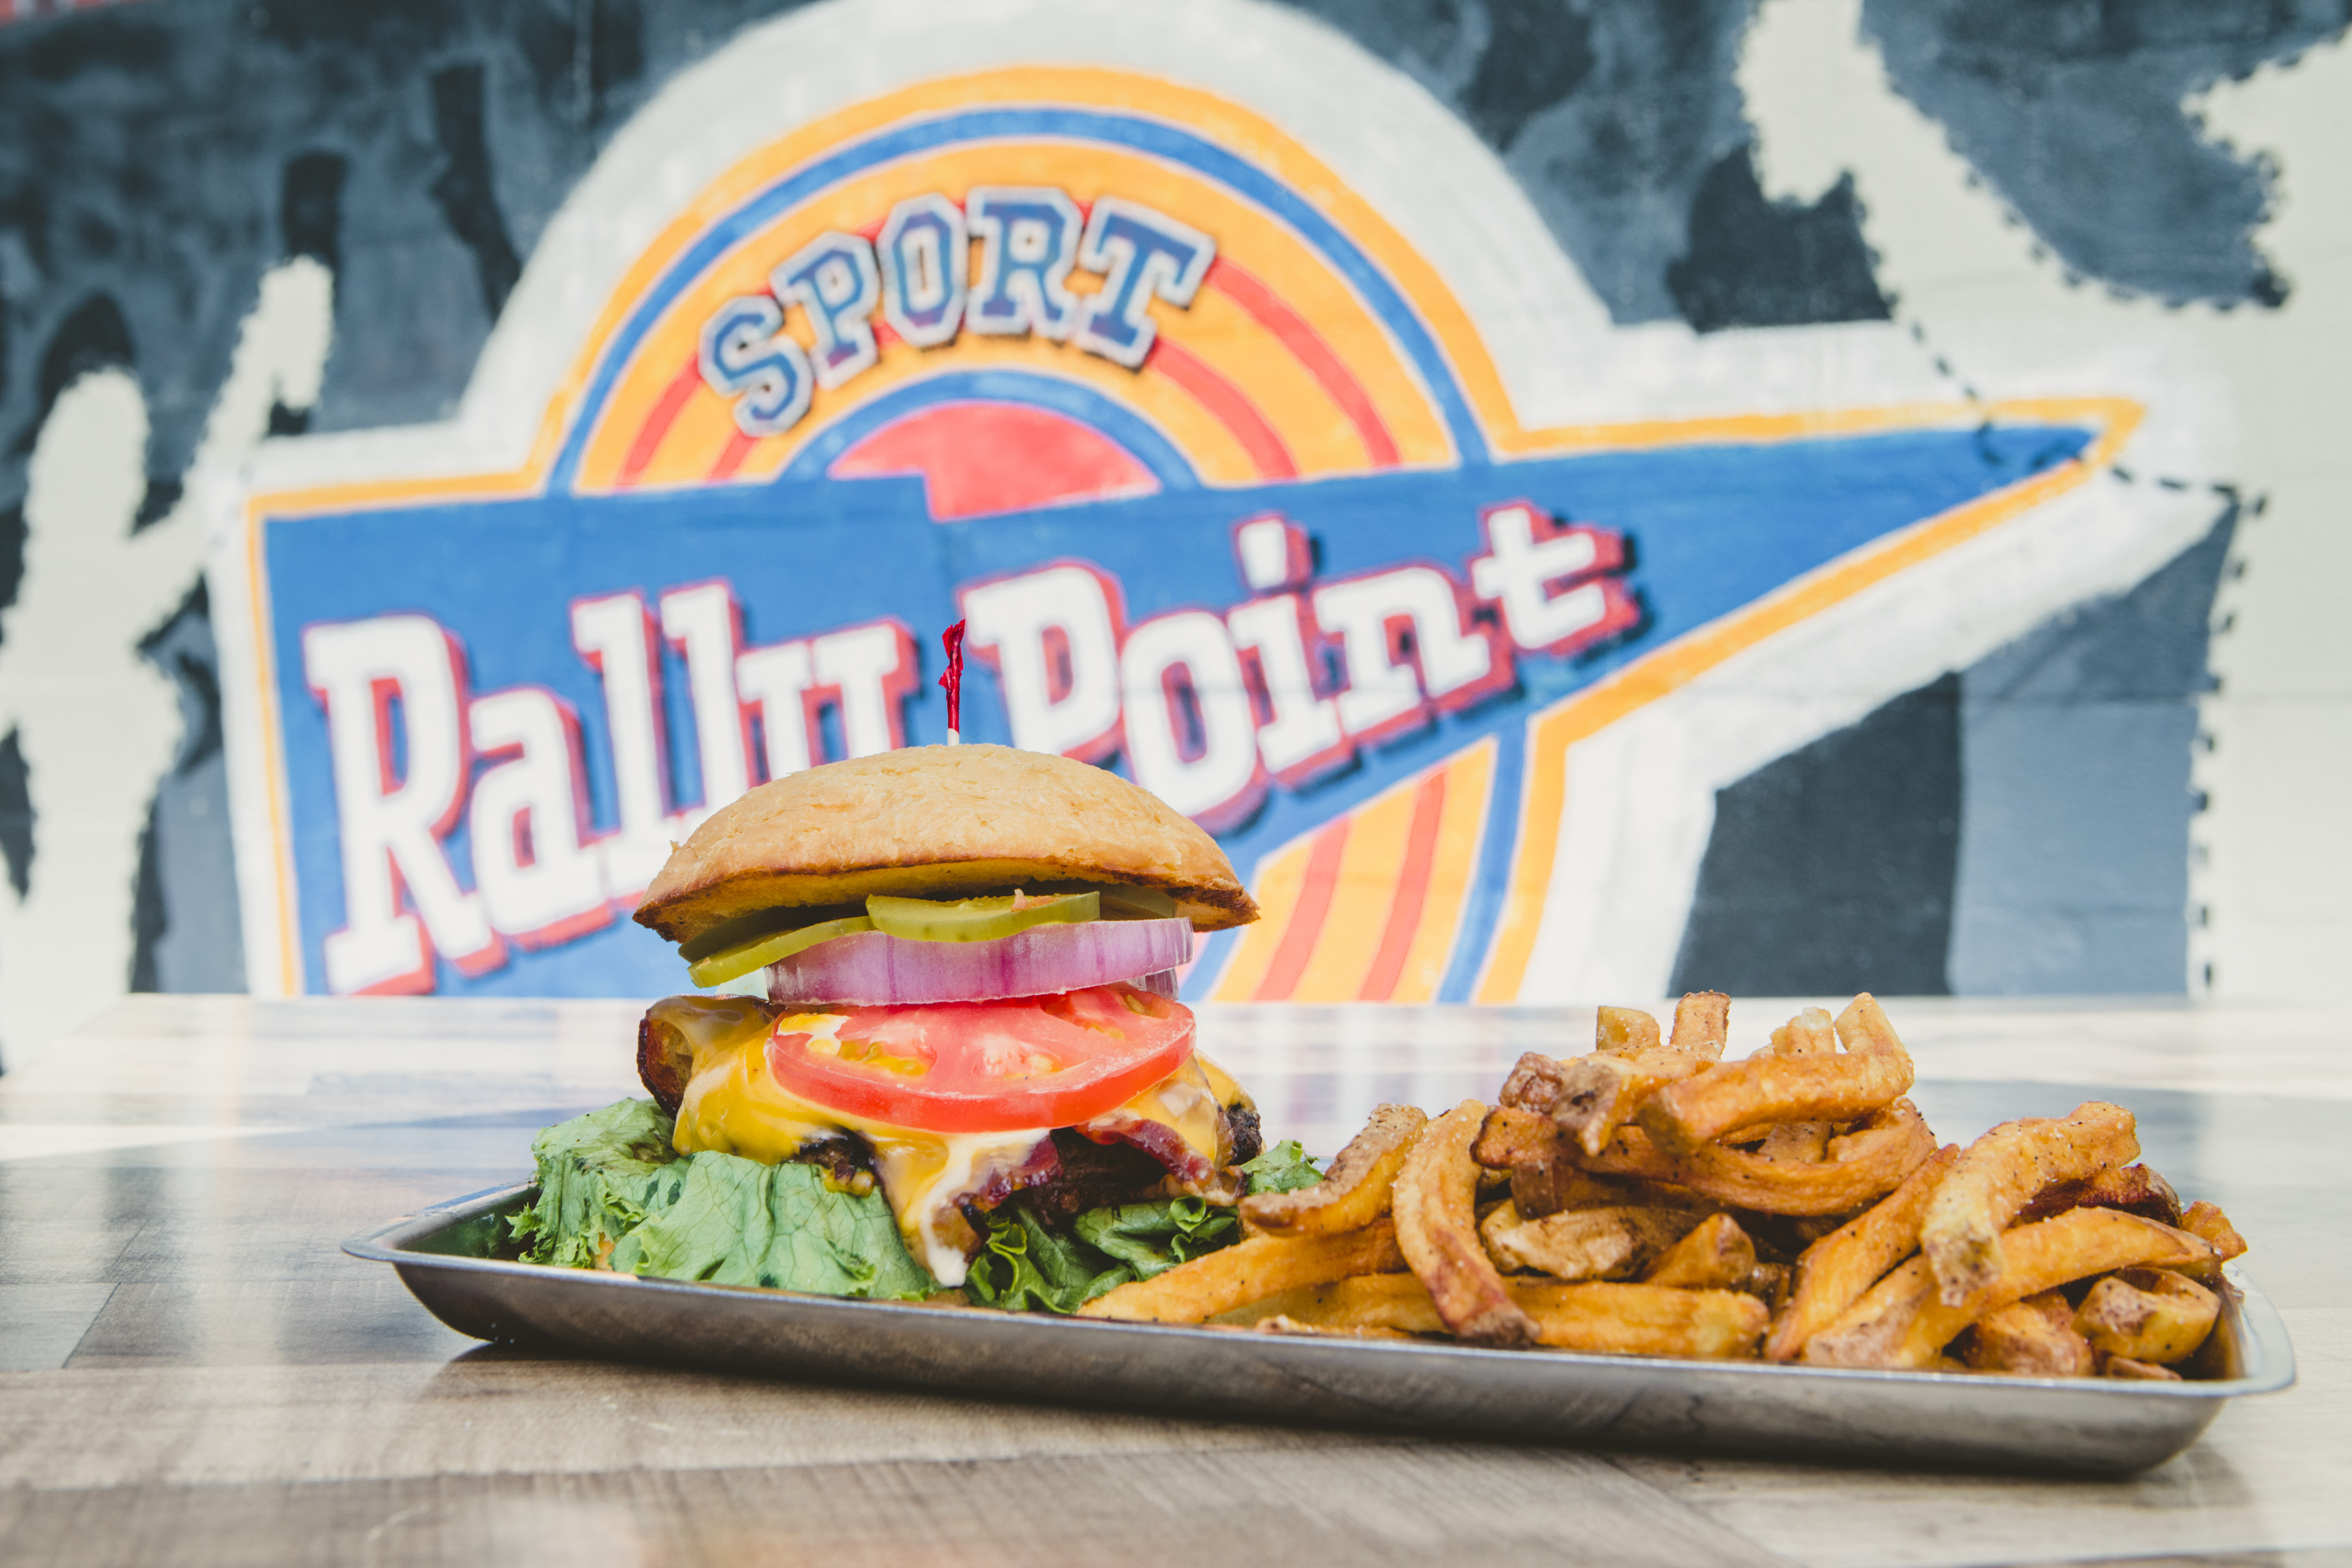 RallyPoint Sport Grill - Cary, NC - Award-winning burgers made fresh in house daily.